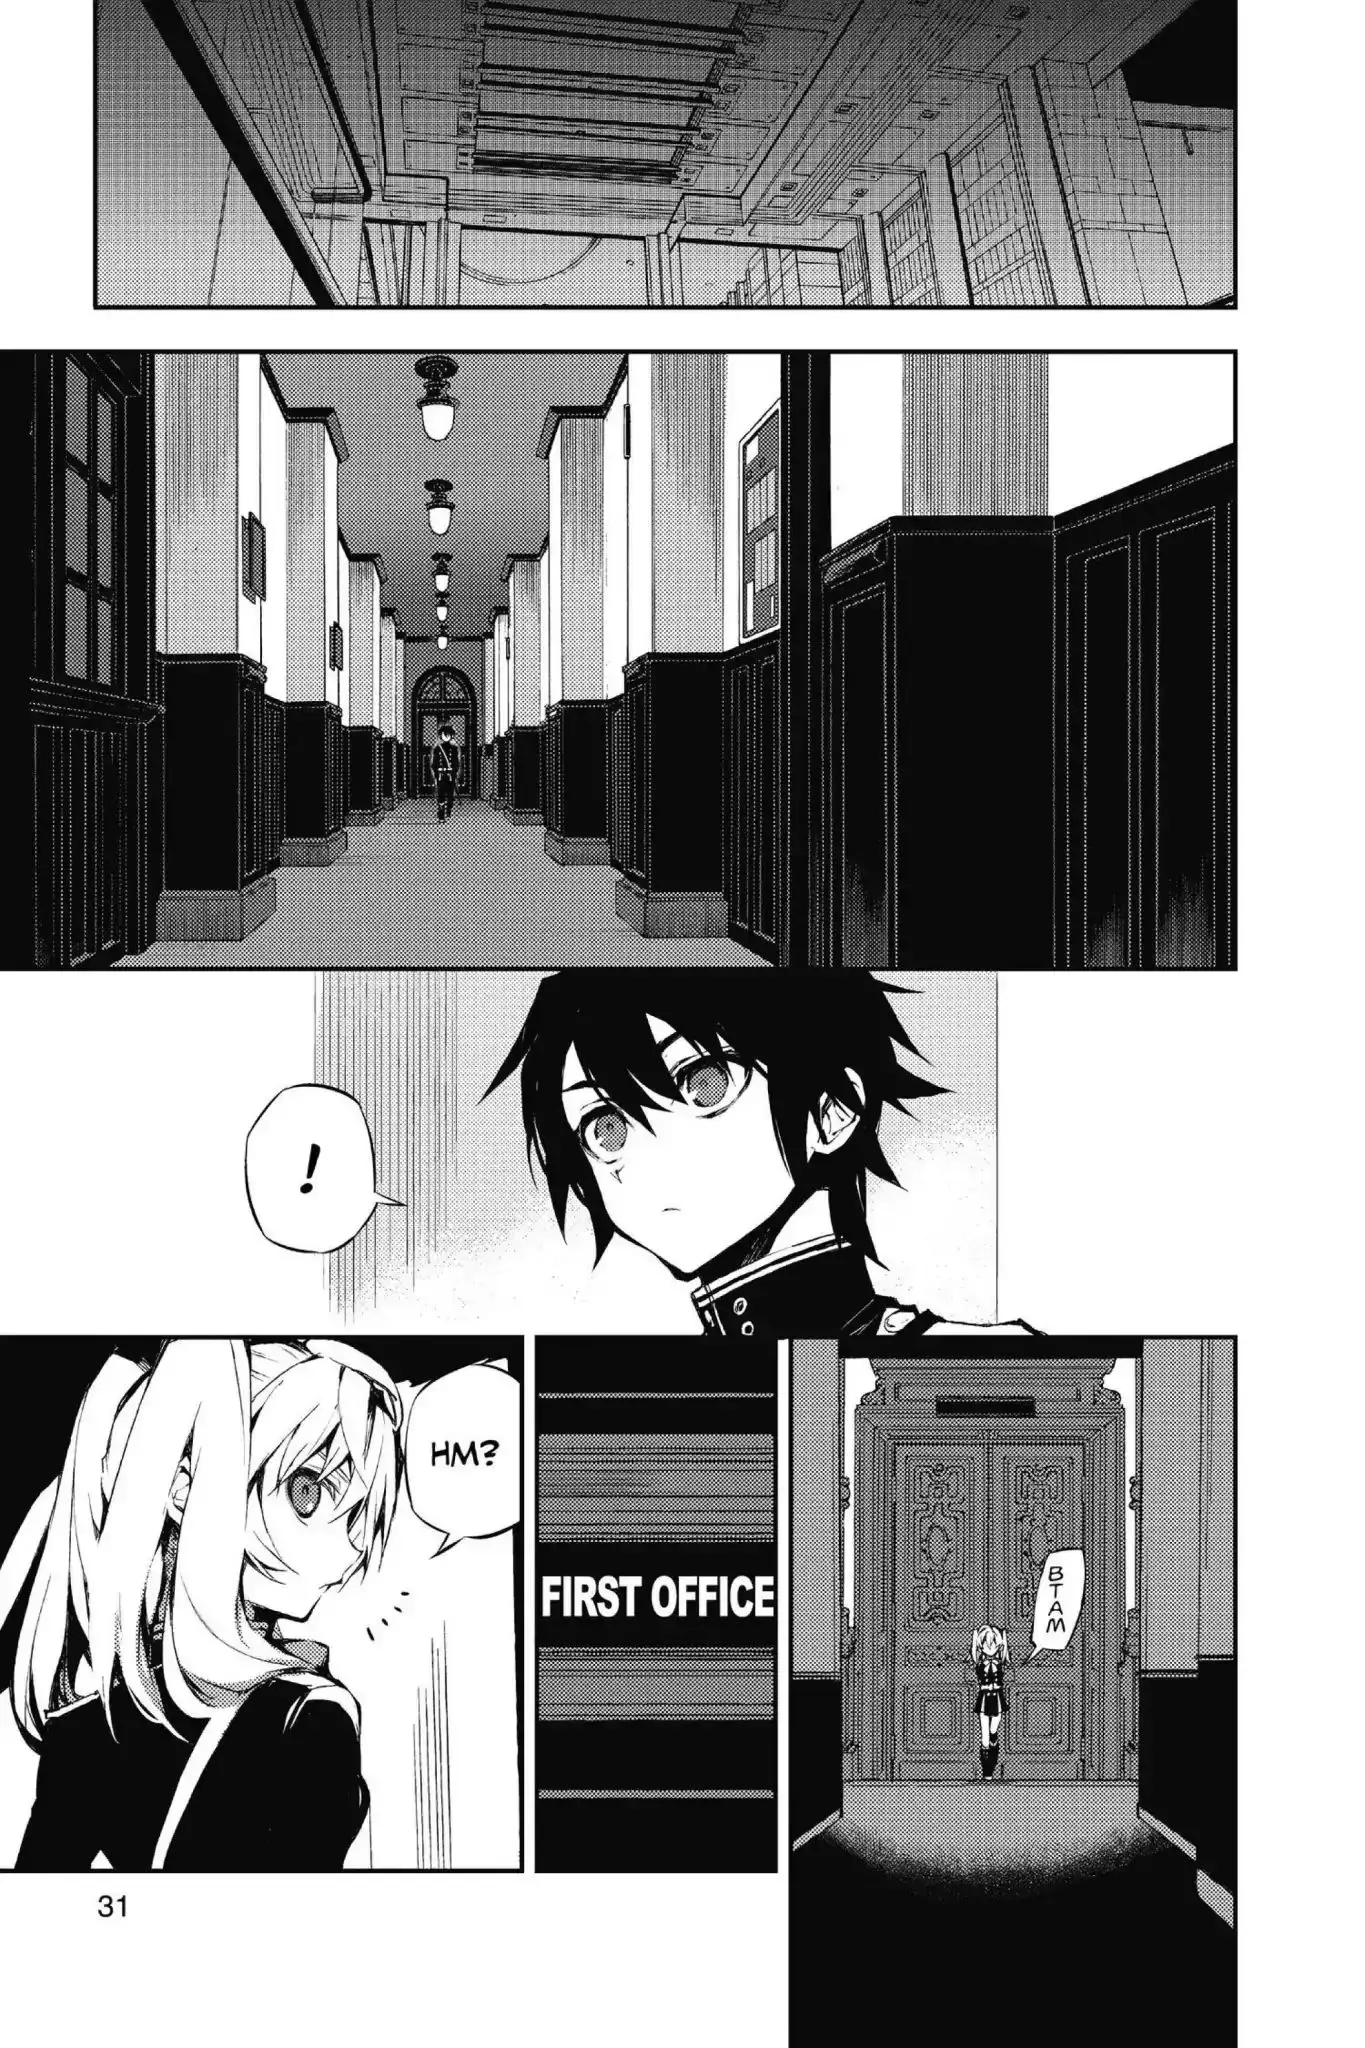 Seraph Of The End - 16 page 29-40172cc2